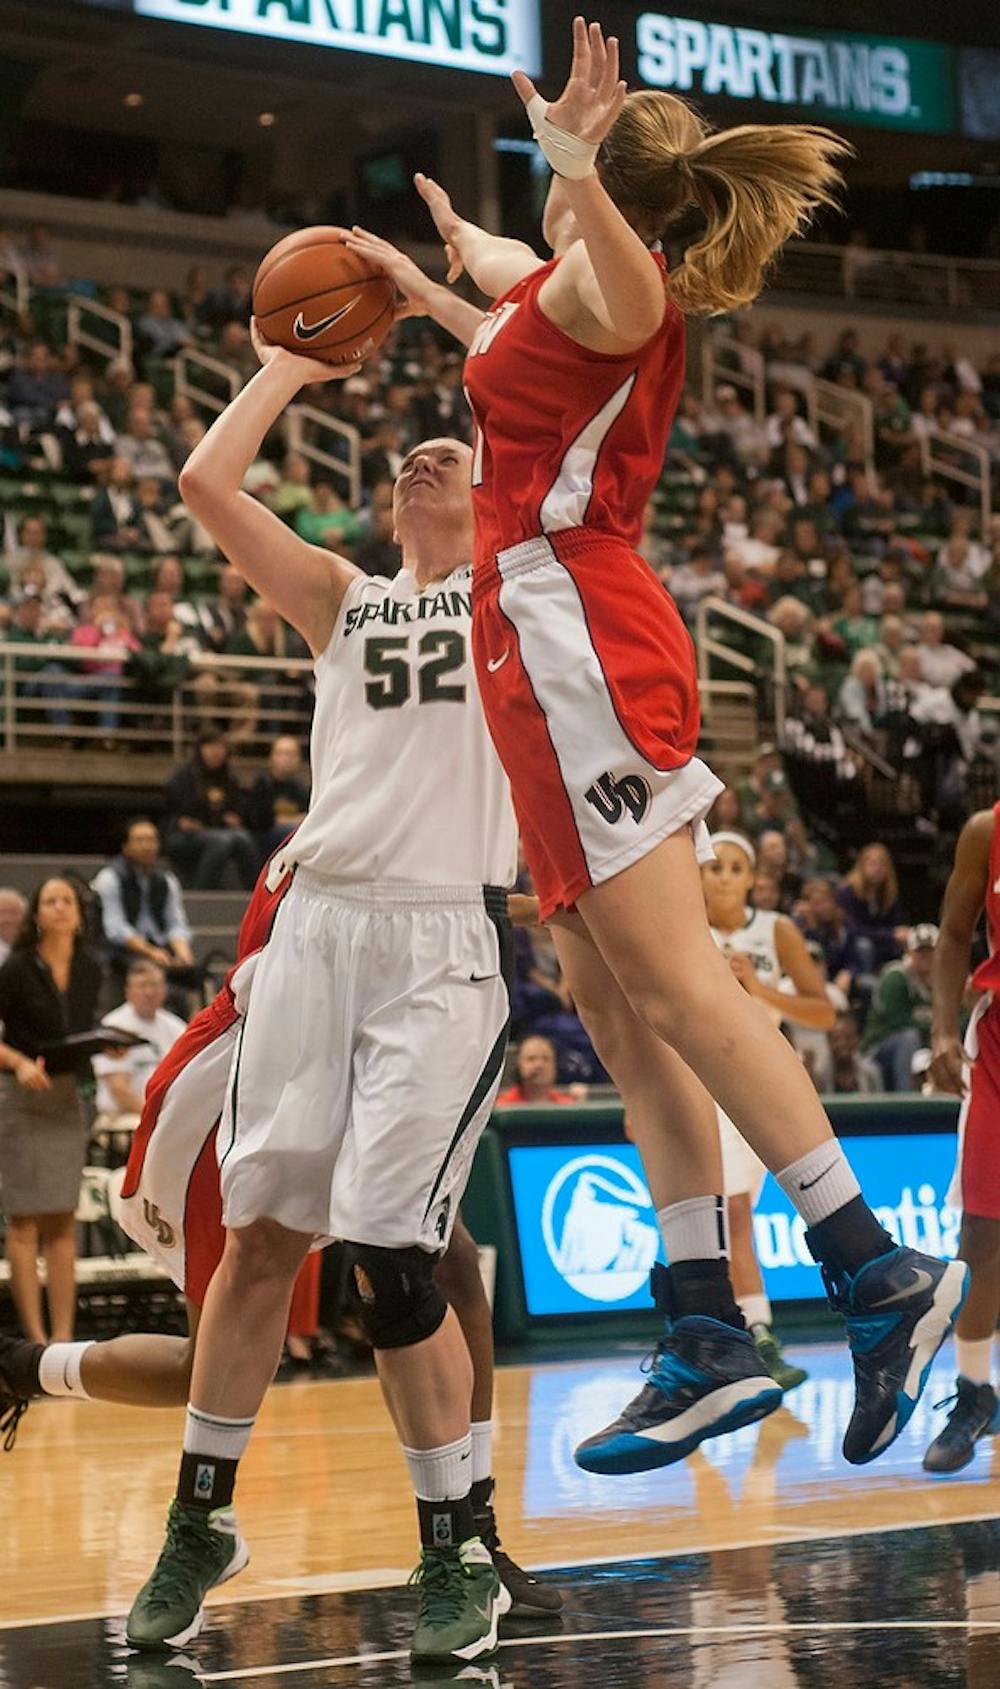 	<p>Junior forward Becca Mills takes a shot next to Dayton Junior forward Ally Malott on Nov. 17, 2013, at Breslin Center. <span class="caps">MSU</span> defeated Dayton in overtime, 96-89. Brian Palmer/The State News</p>